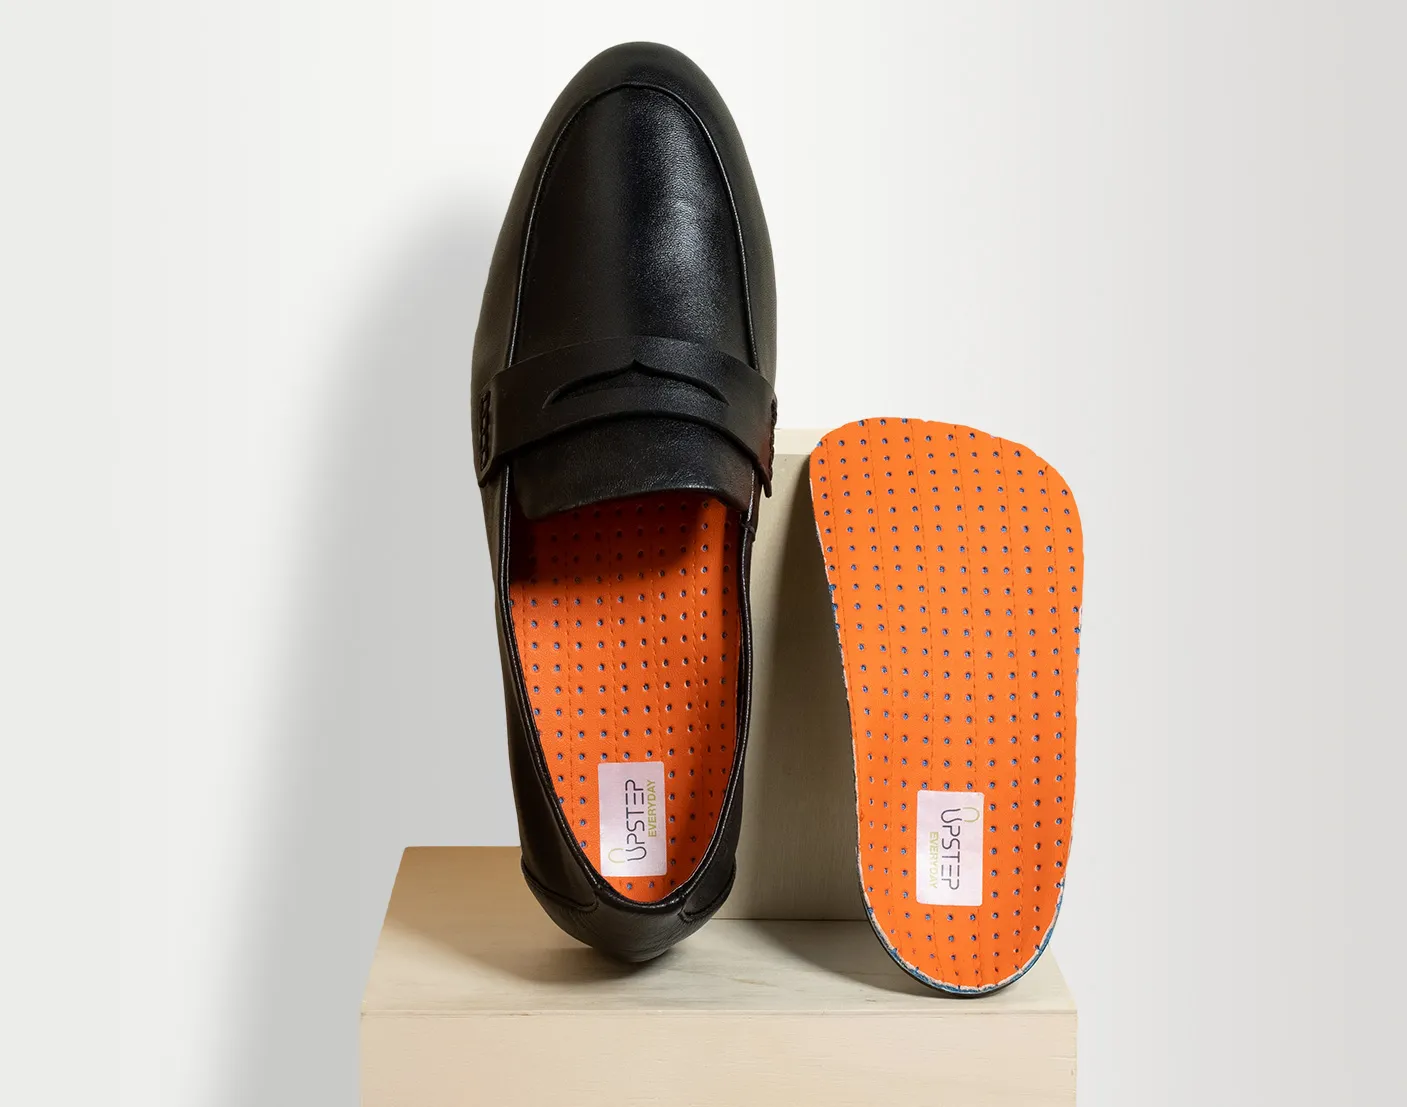 Upstep custom orthotic in orange being presented in a dress shoe with another orthotic next to it